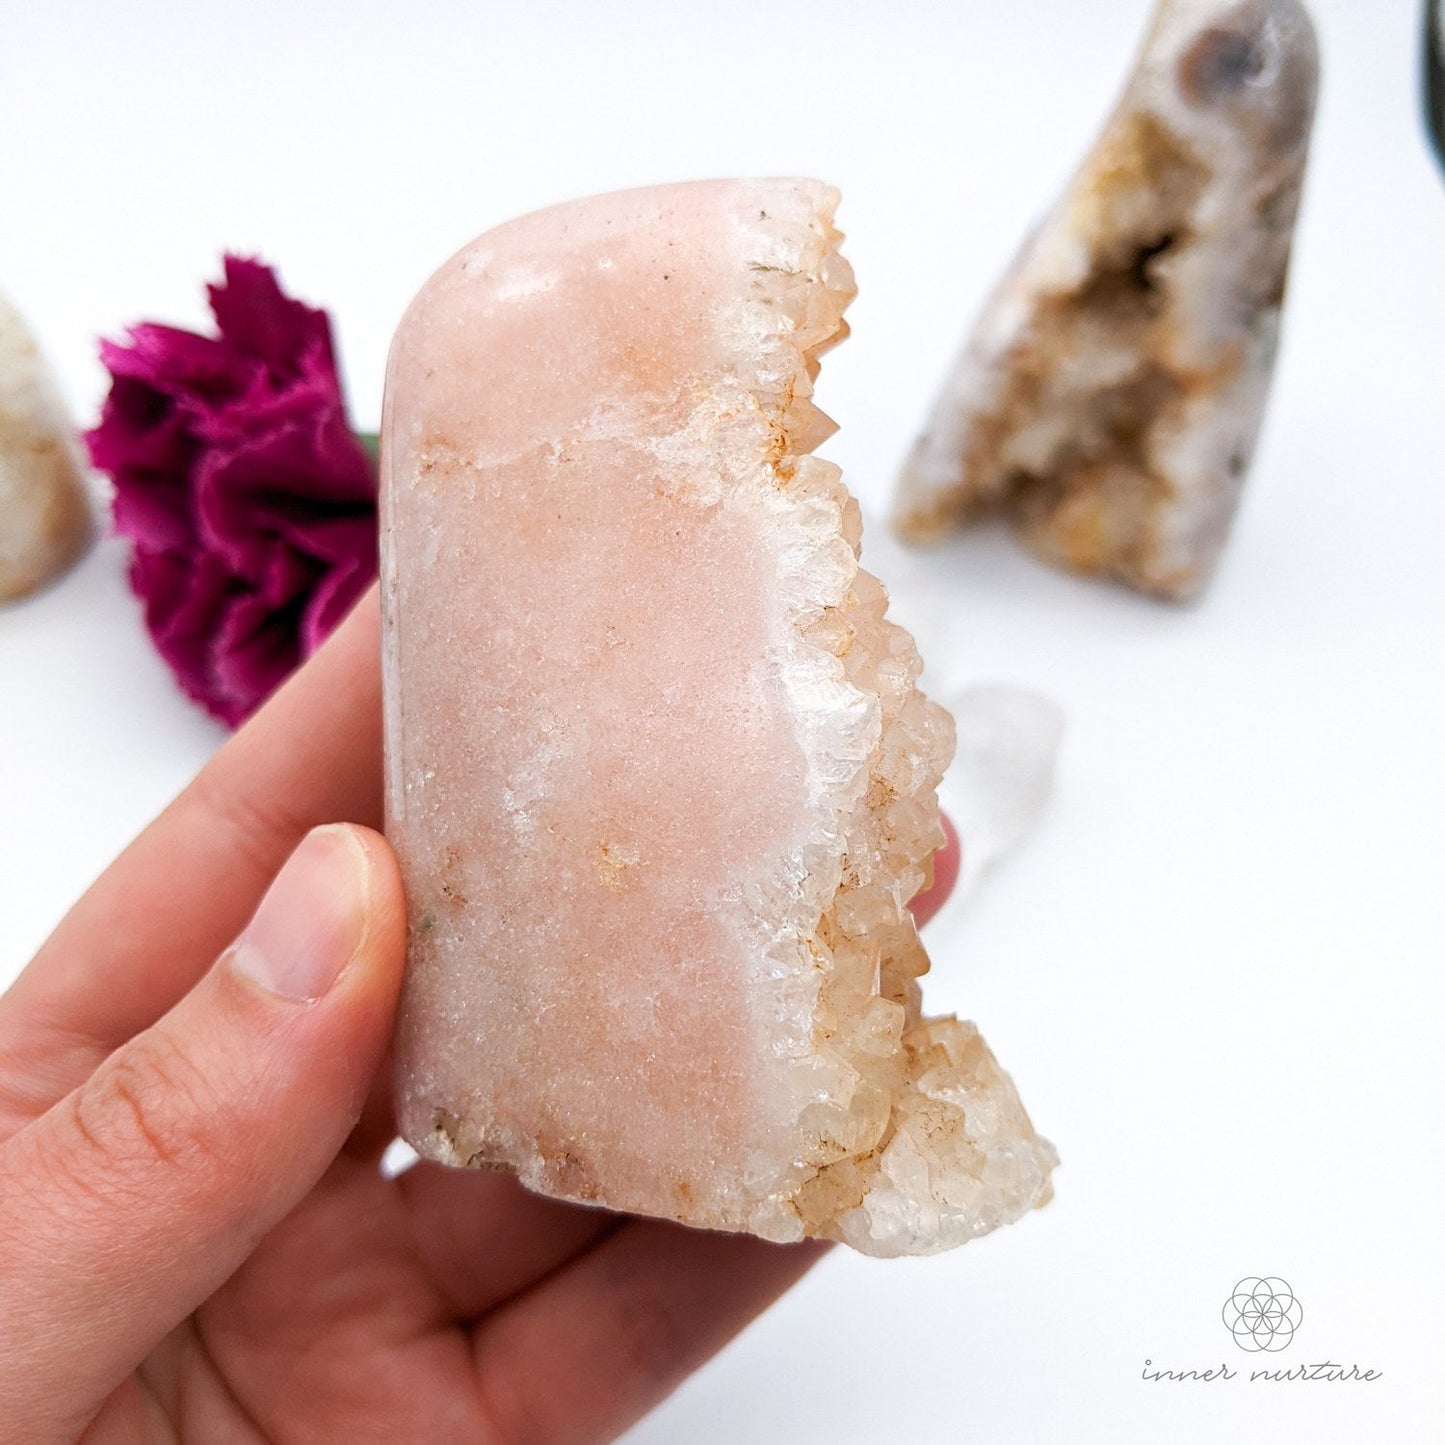 Pink Amethyst Free Form Cluster - 256g | Beautiful Healing Crystals Australia - Shop Online | Ethically Sourced